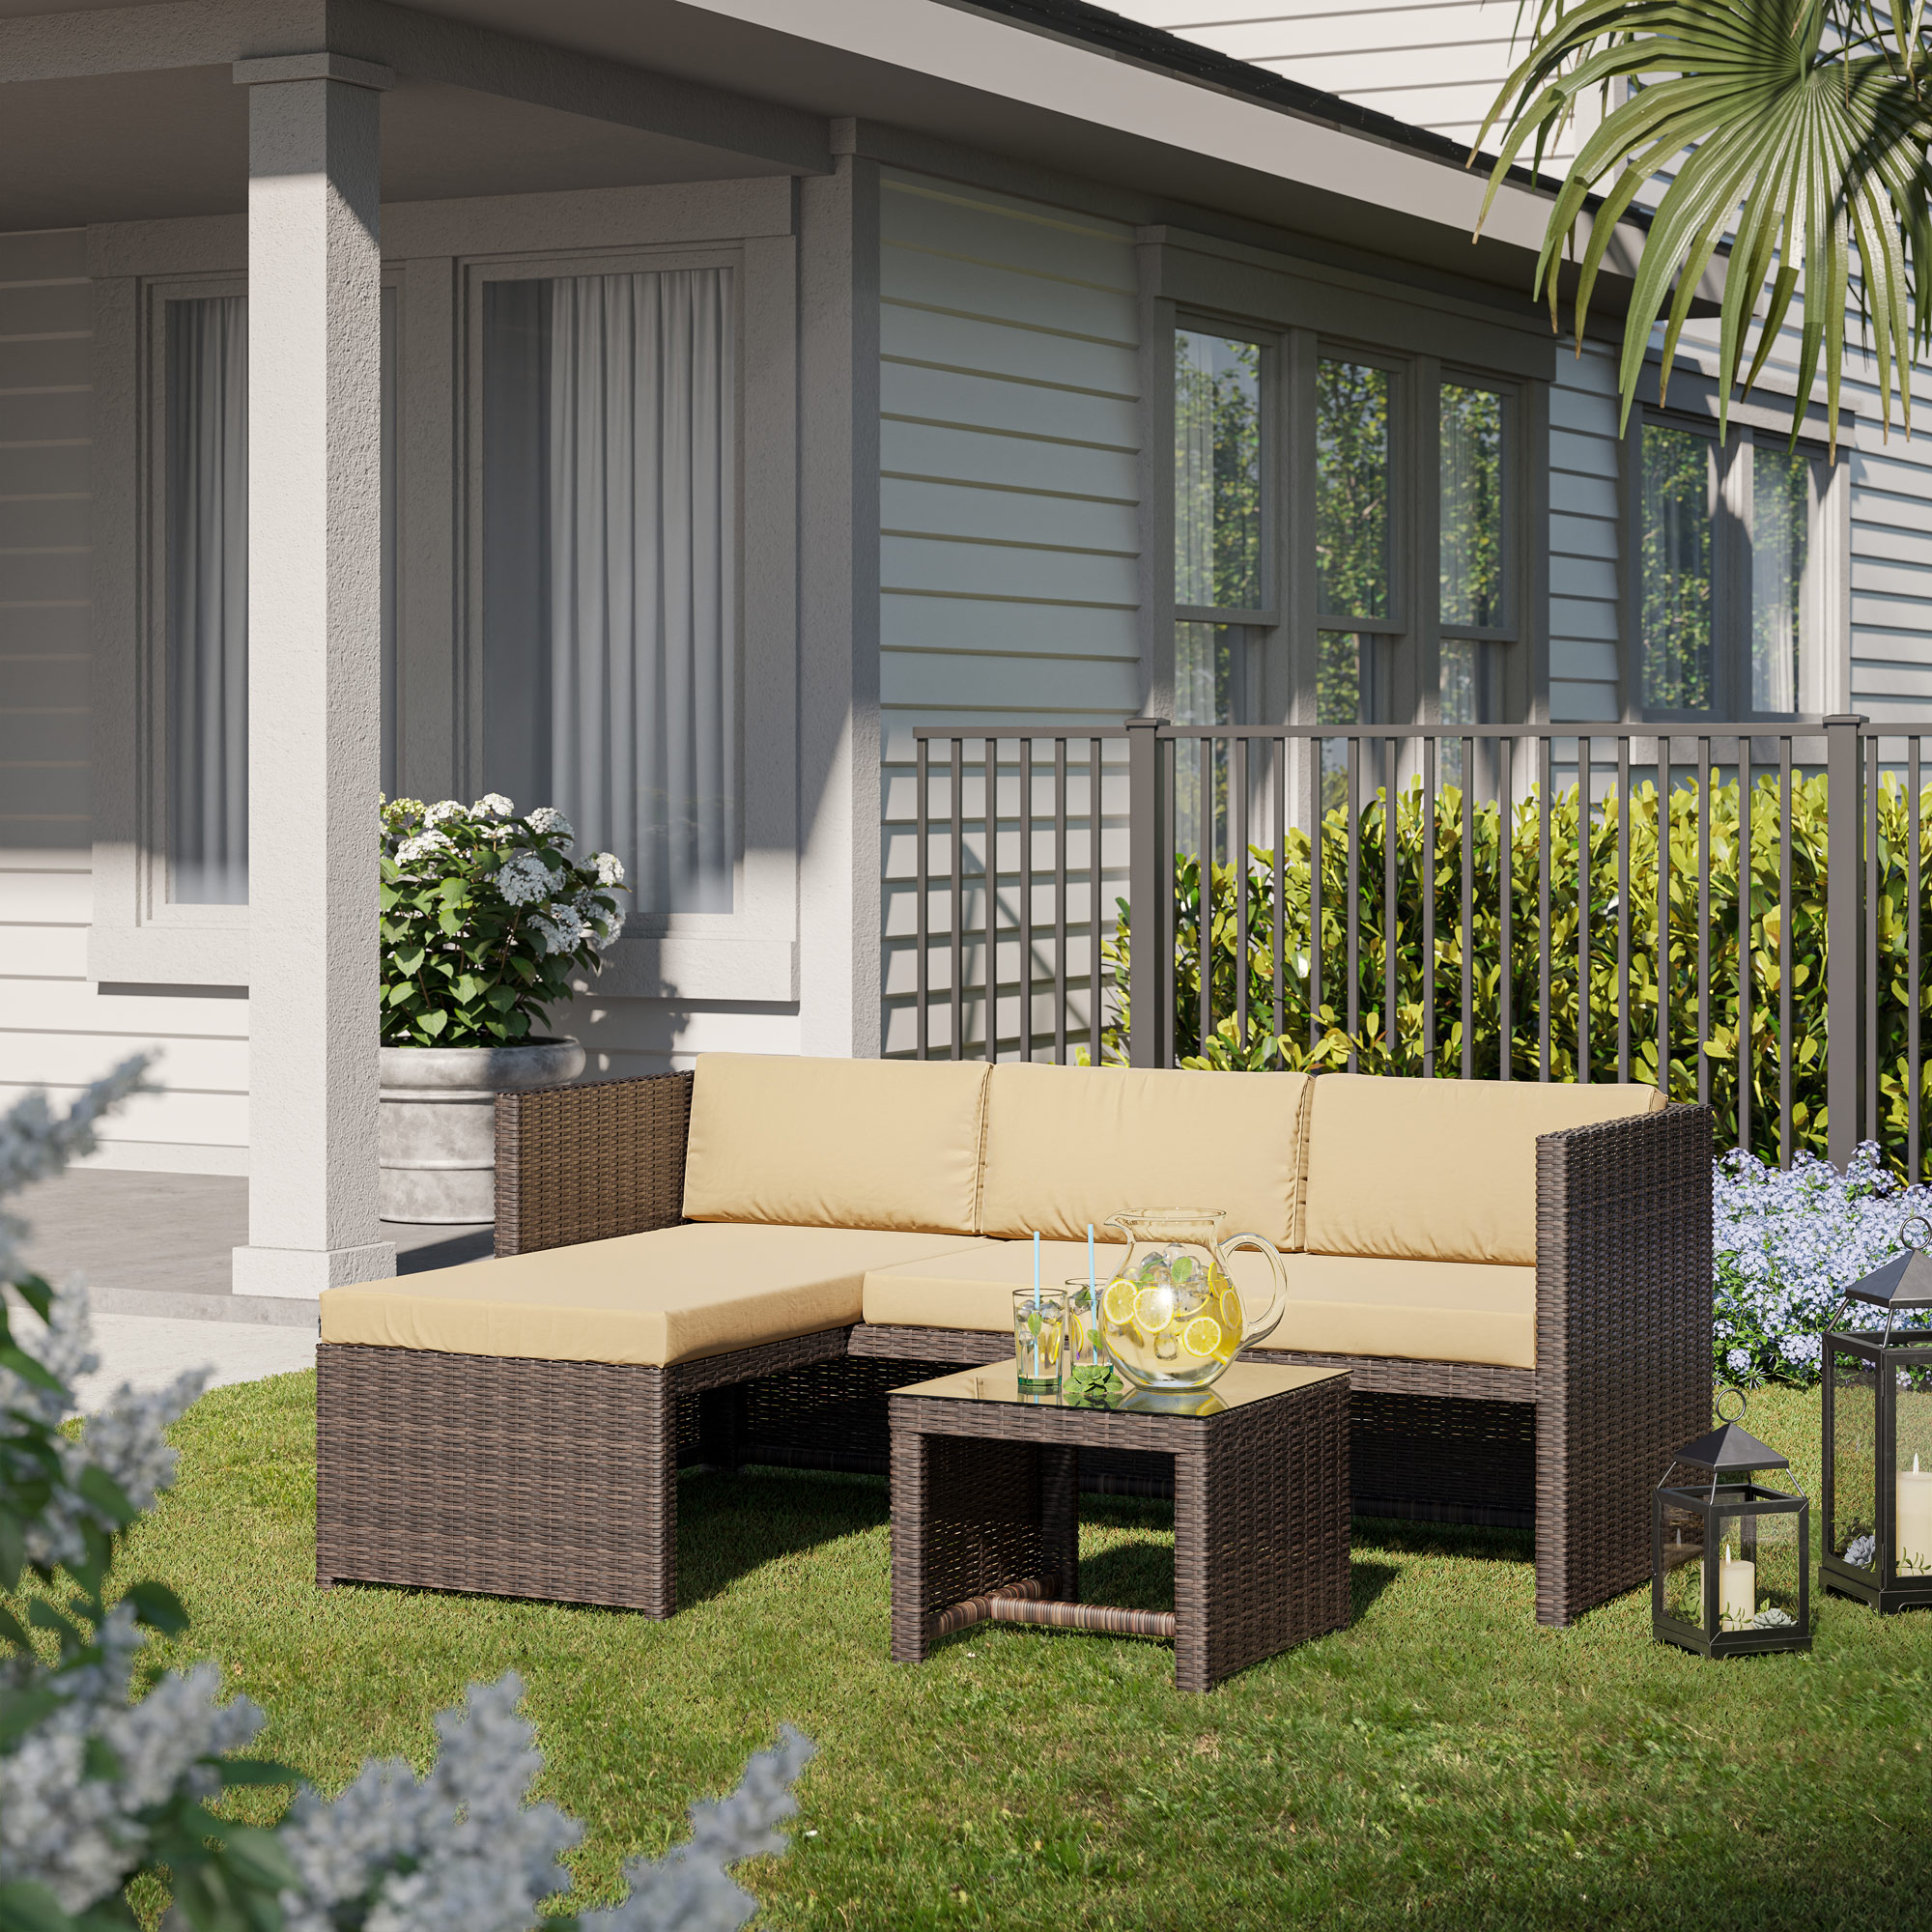 BELLEZE Balboa 3 Piece Patio Conversation Set All-Weather Wicker Rattan Corner Sofa with Cushion and Glass Table, Brown - image 2 of 7